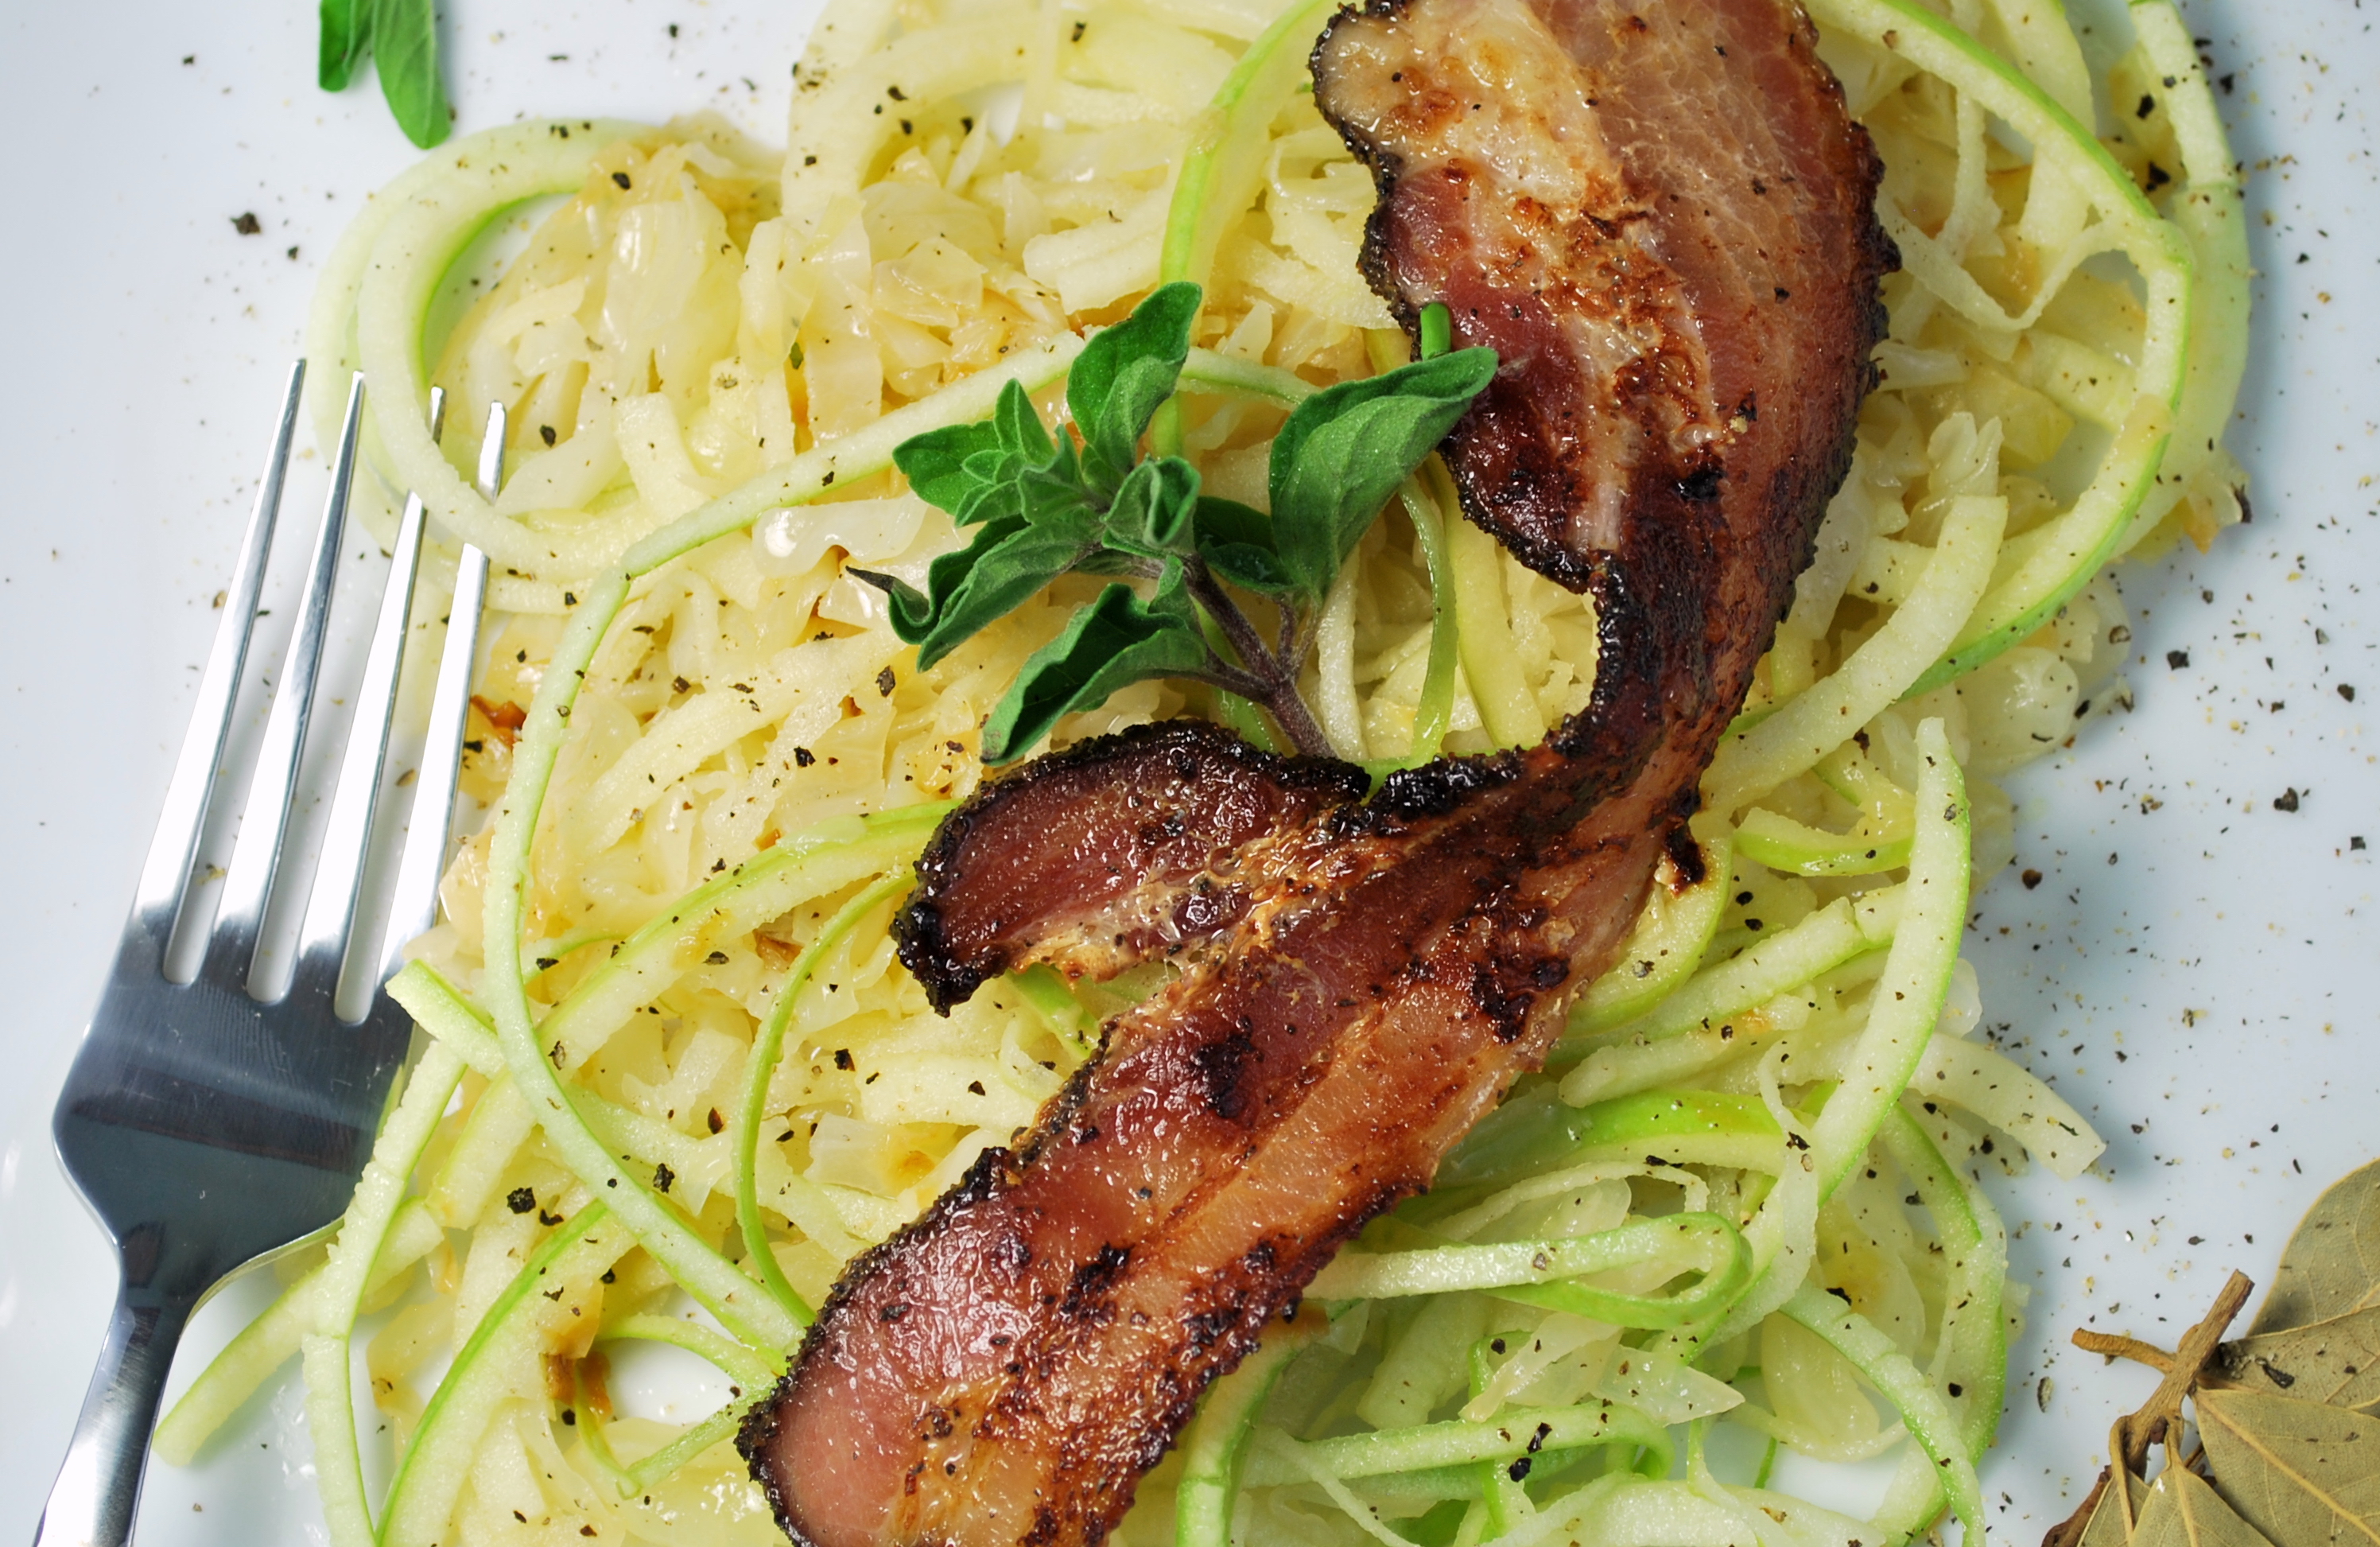 spiralizing recipes - main dishes, sides - cabbage and apple saute